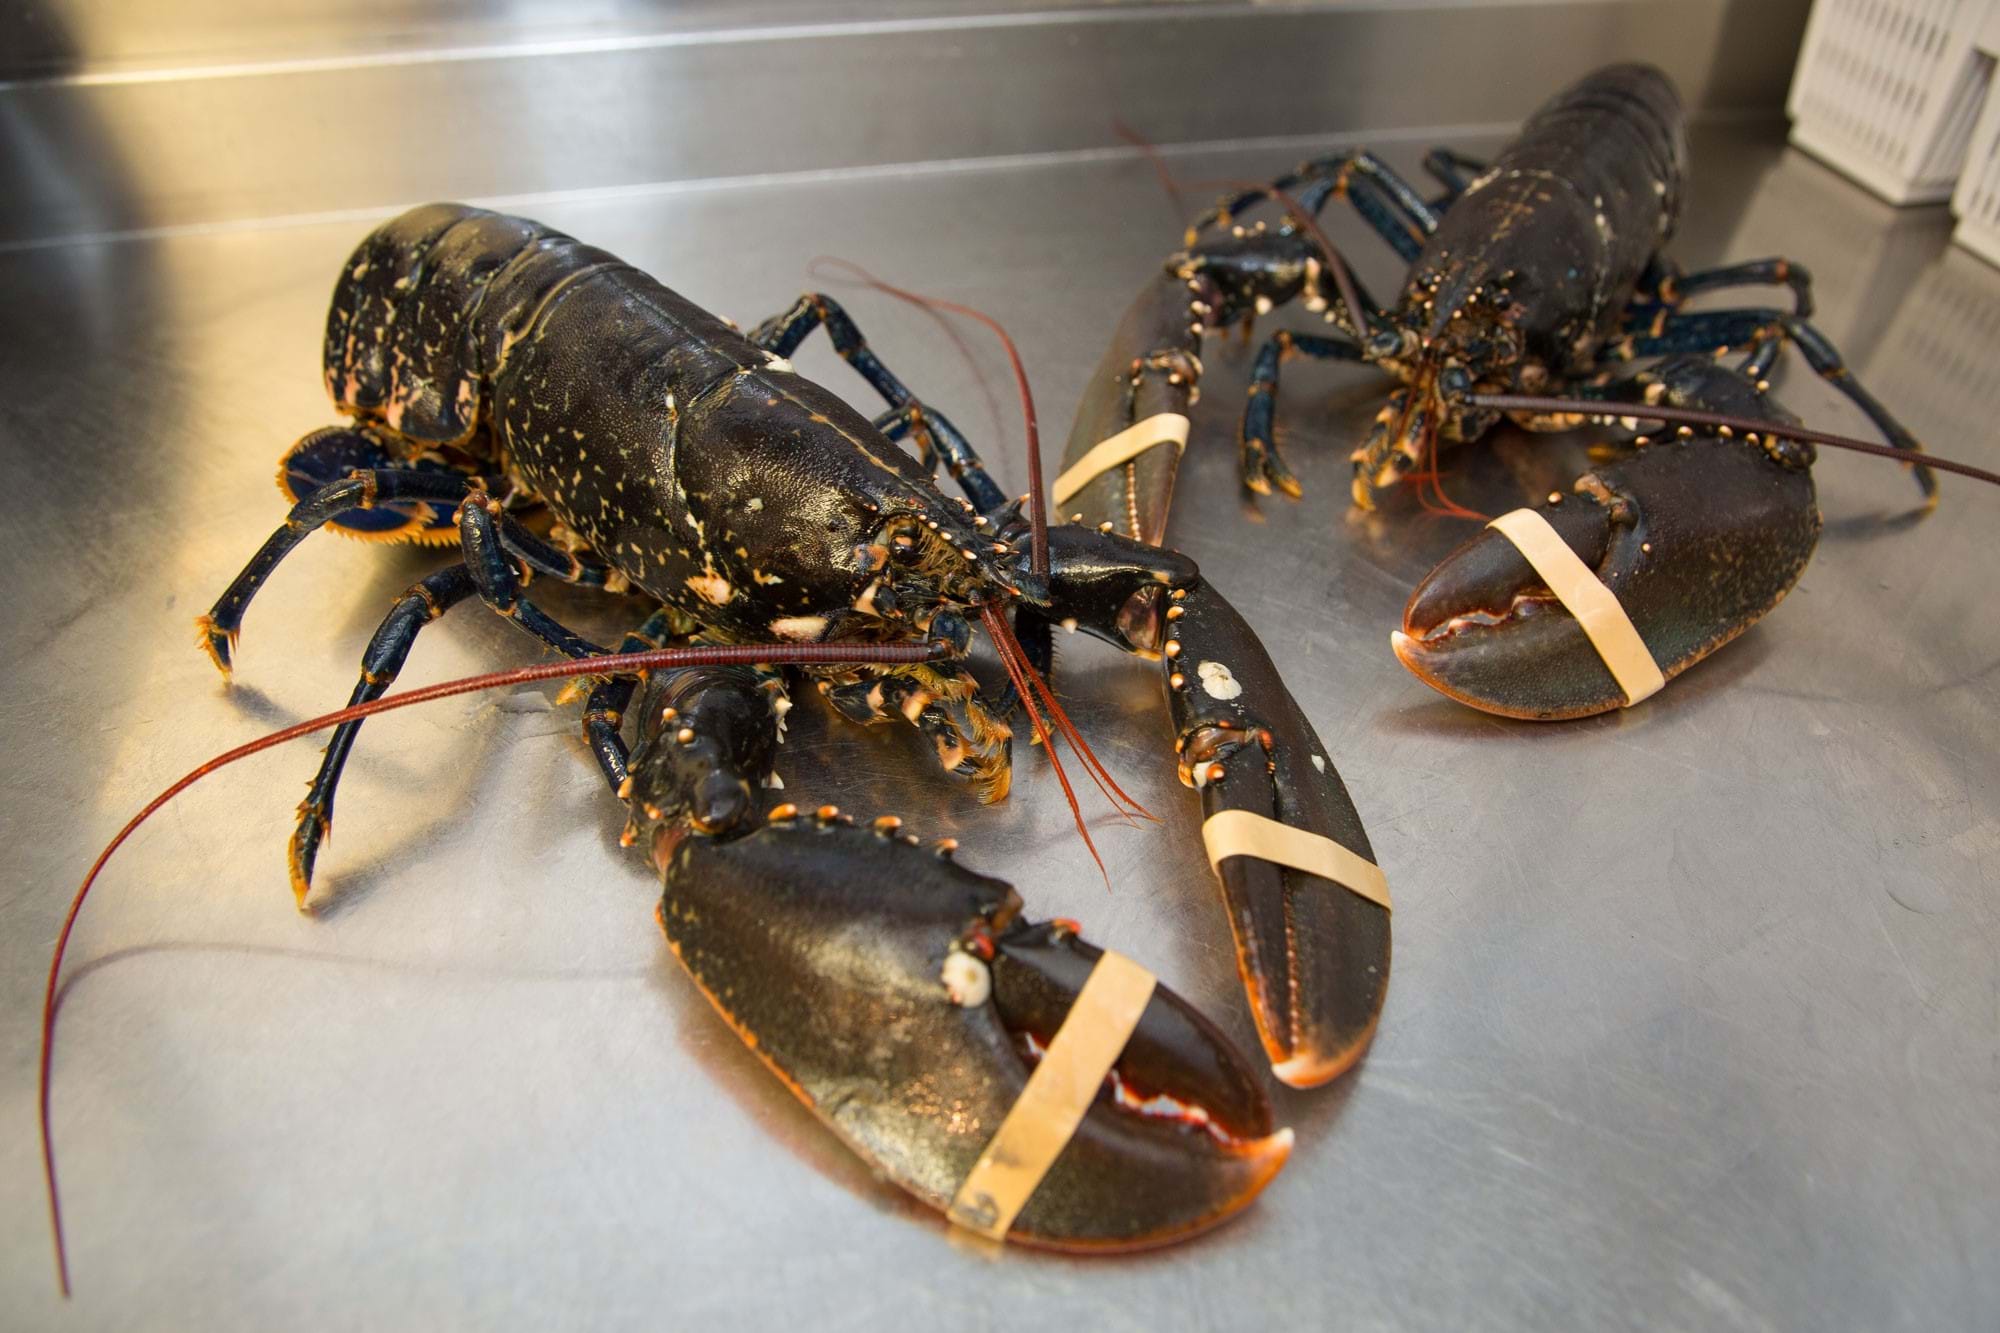 Photo of two lobsters on stainless steel counter with bands on their claws